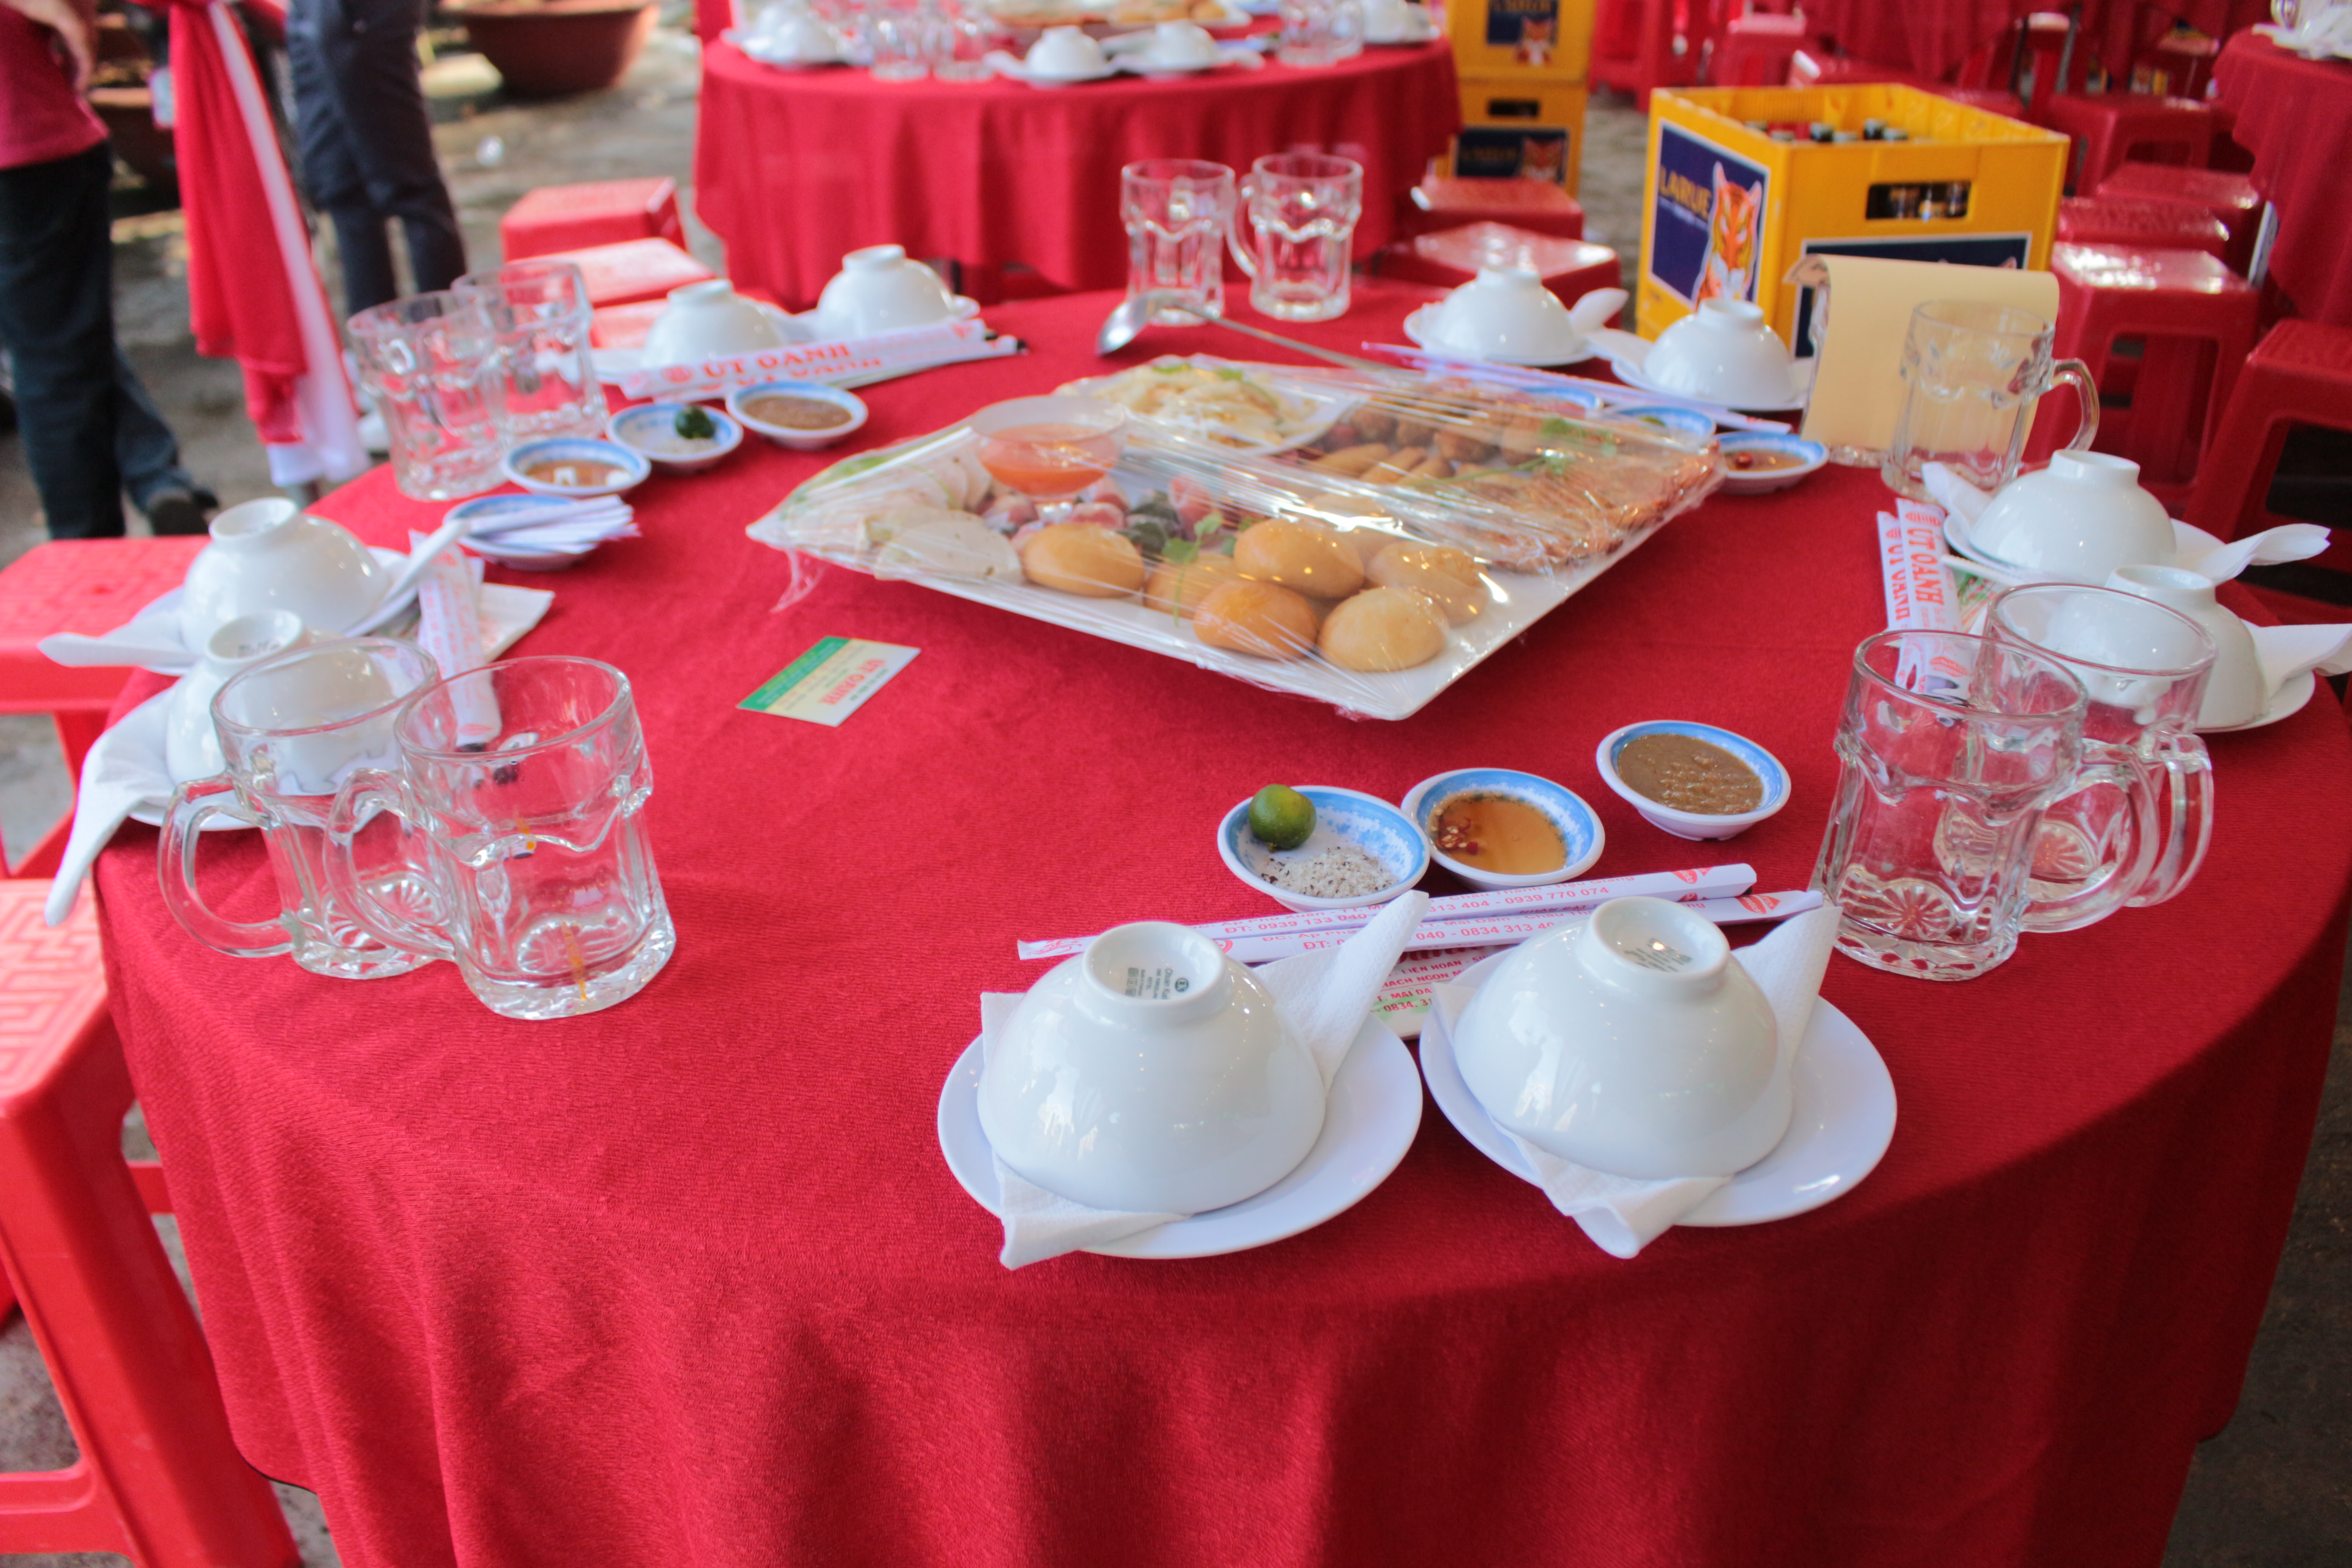 A photo shows table set up for a wedding party in the suburb of Can Tho City in Mekong Delta, Vietnam. Photo: Ray Kuschert / Tuoi Tre News